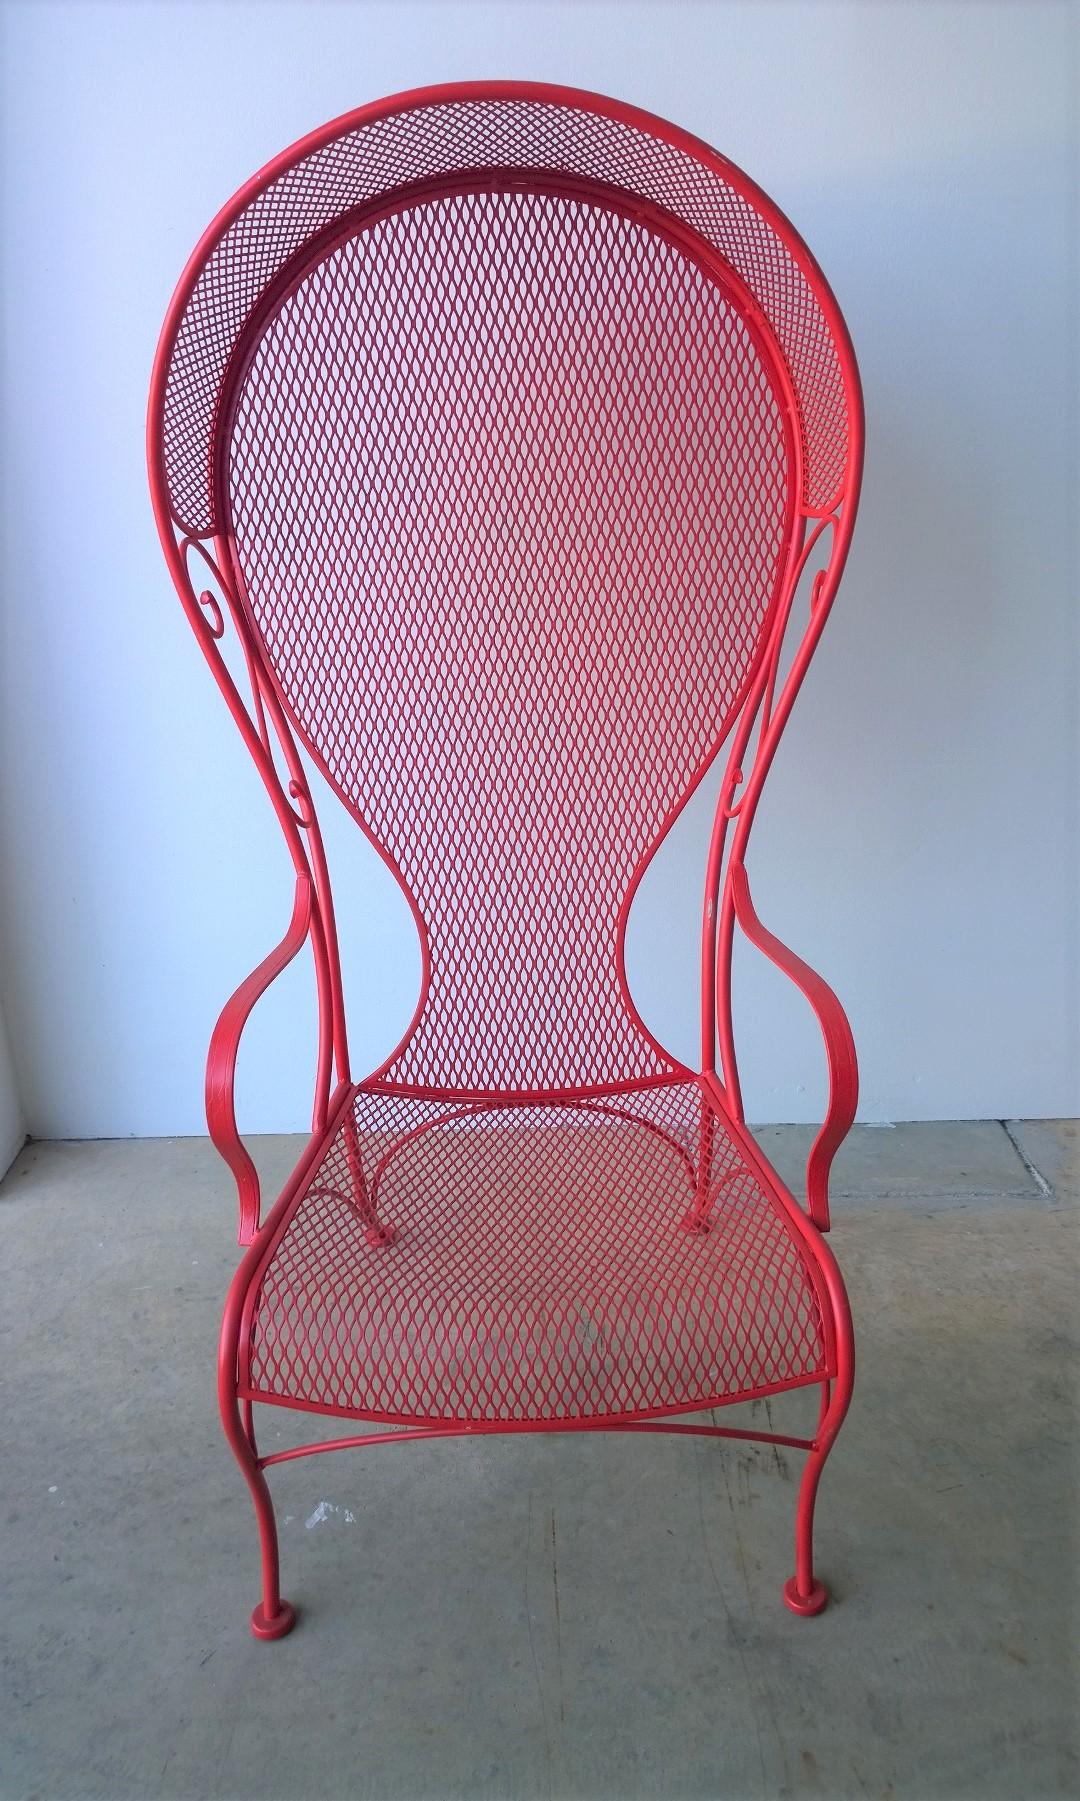 Offered is a Mid-Century Modern Russell Woodard canopy patio chair. This design for this Woodard Canopy chair is quite rare! The lines of the chair are both lyrical and clean at the same time. Would look fabulous as a statement piece on any patio,